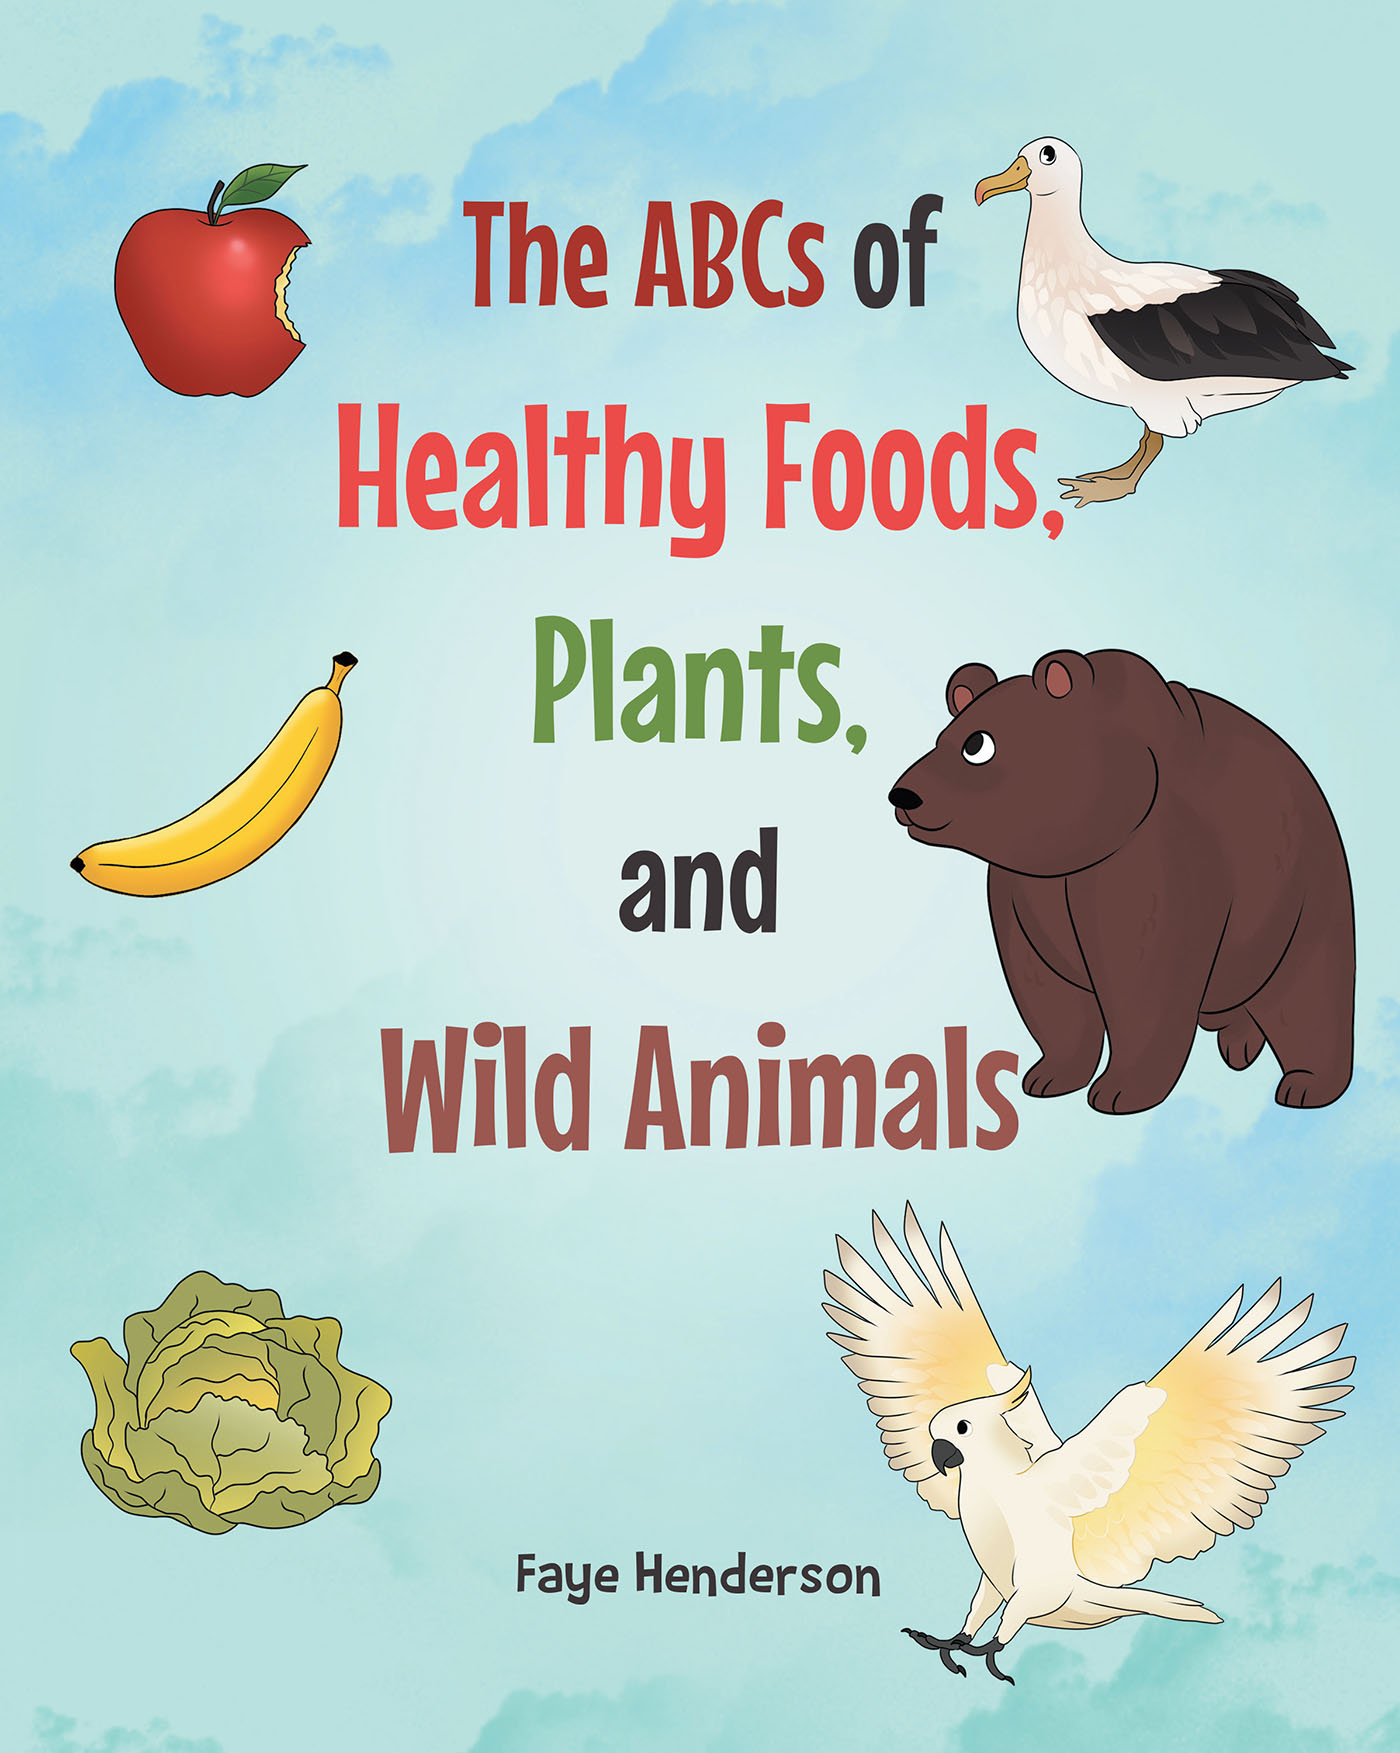 Faye Henderson’s Newly Released “The ABCs of Healthy Foods, Plants, and Wild Animals” is a Fun Resource for Learning Health and Science Facts